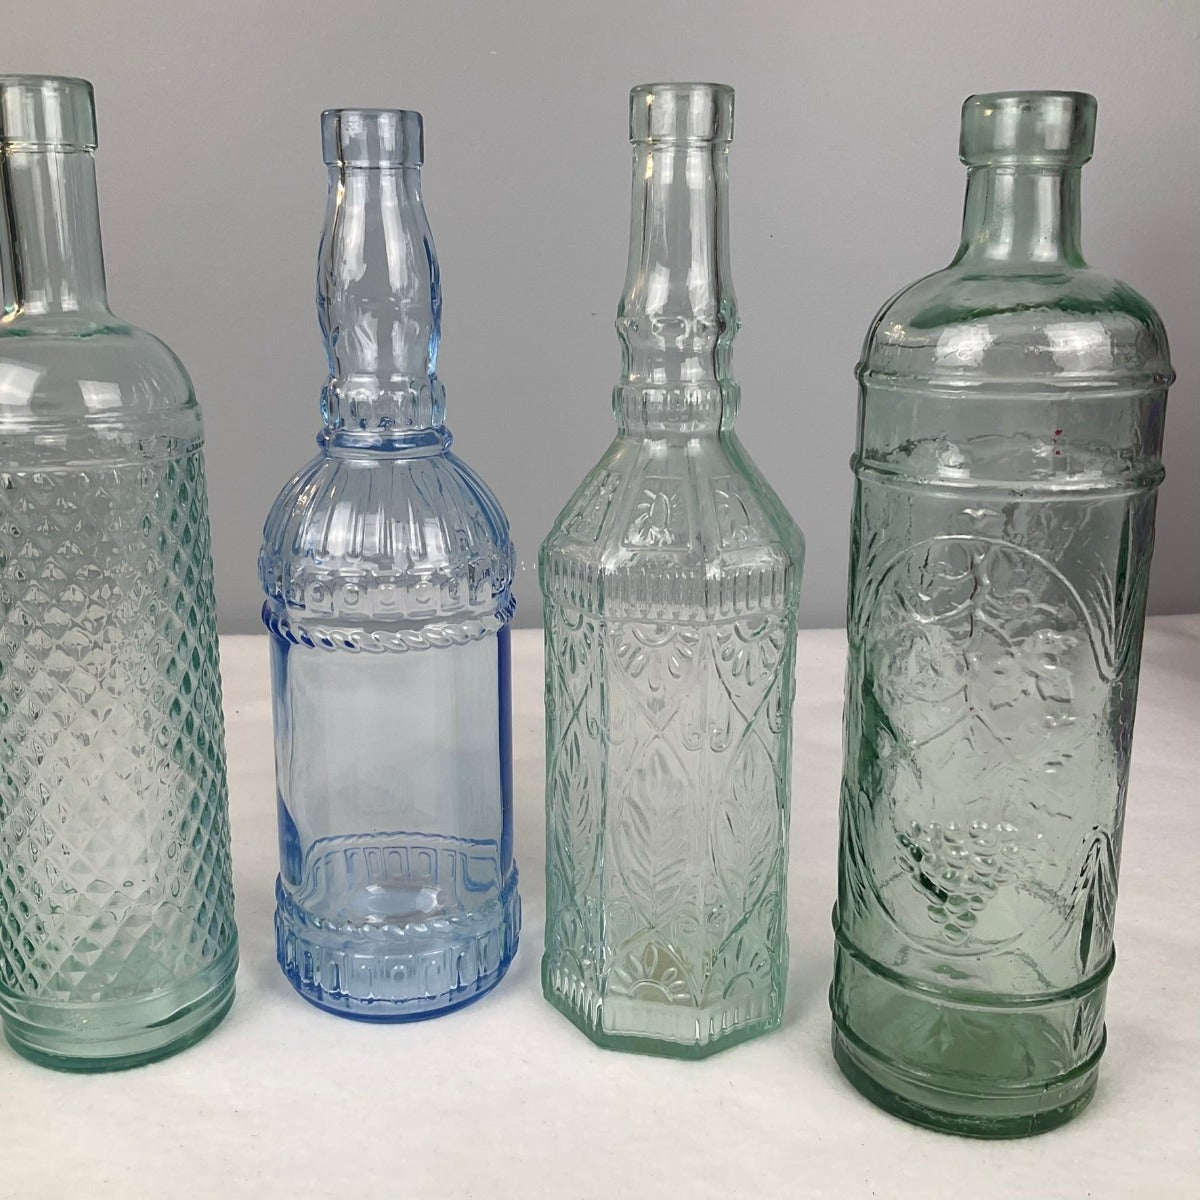 Colorful Full Size Decorative Glass Bottles